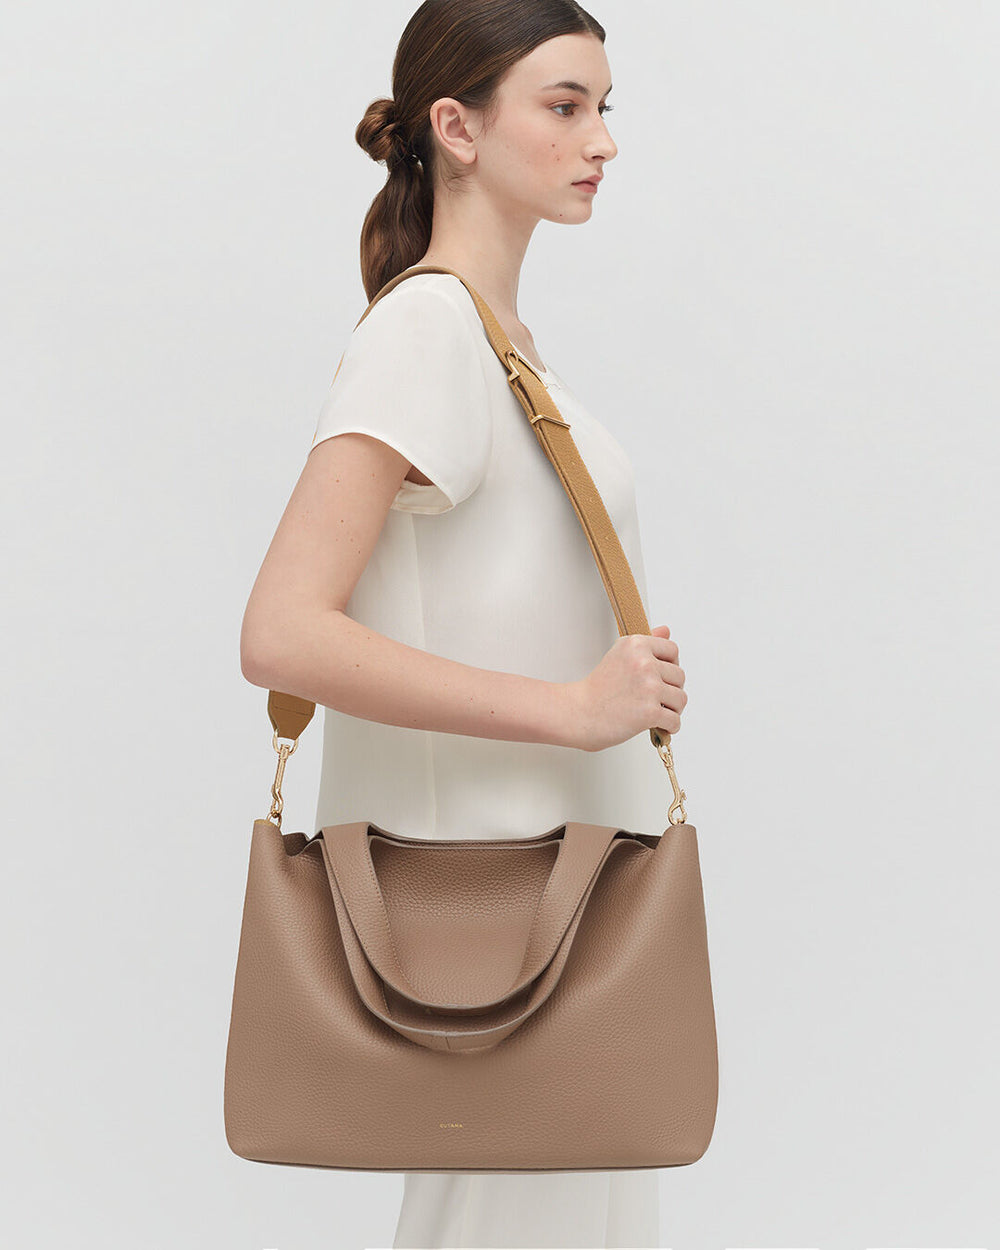 Woman standing side profile with a large shoulder bag.